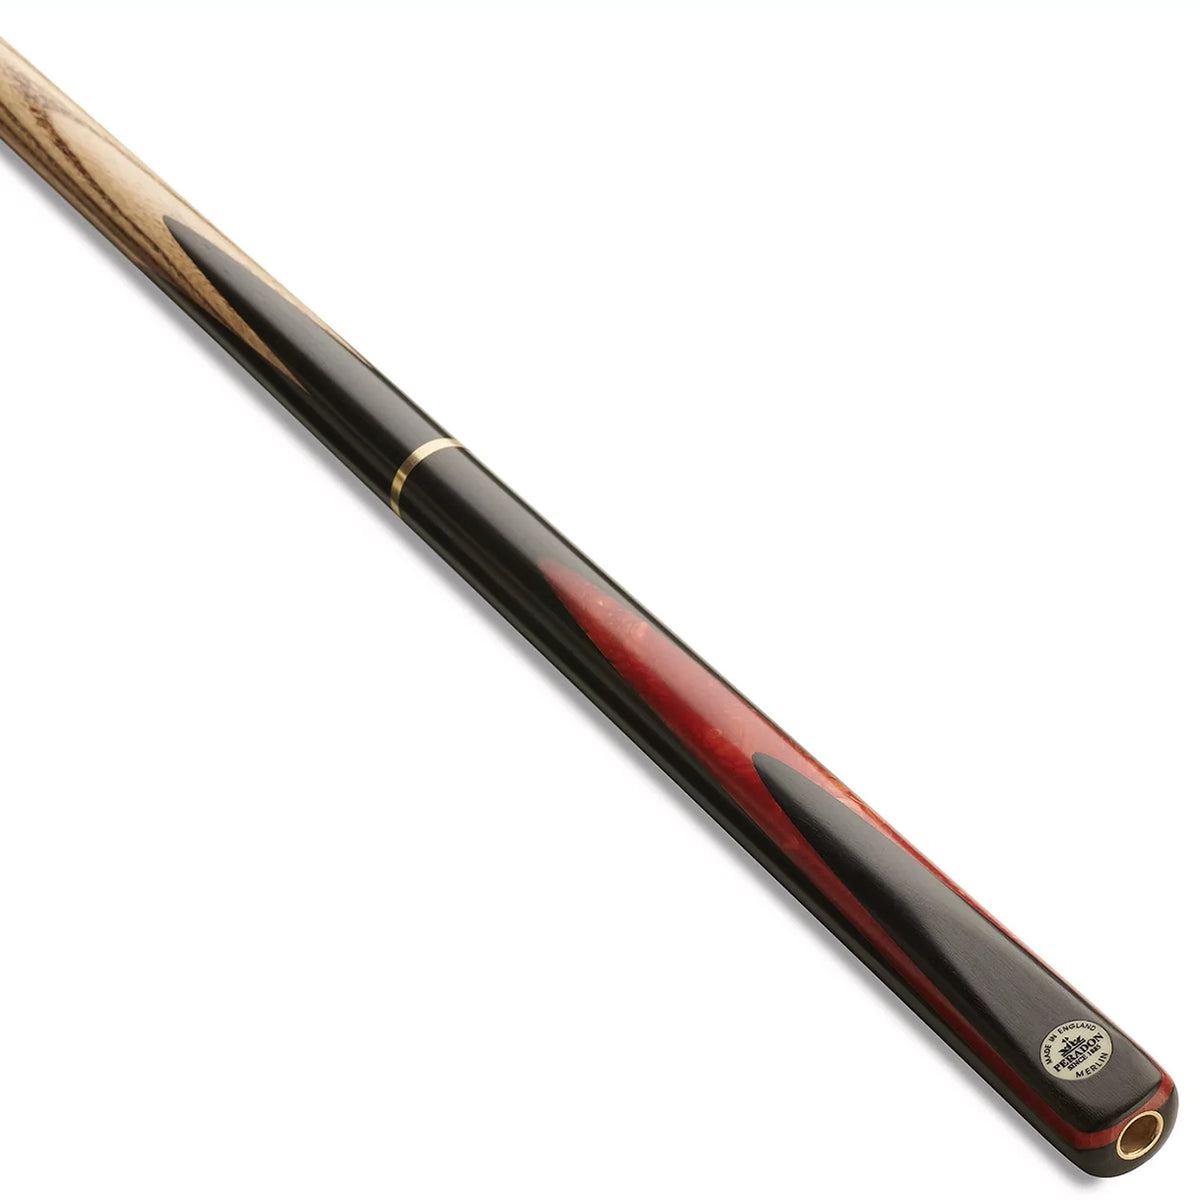 Peradon Merlin 3/4 Jointed Snooker Cue. Butt View